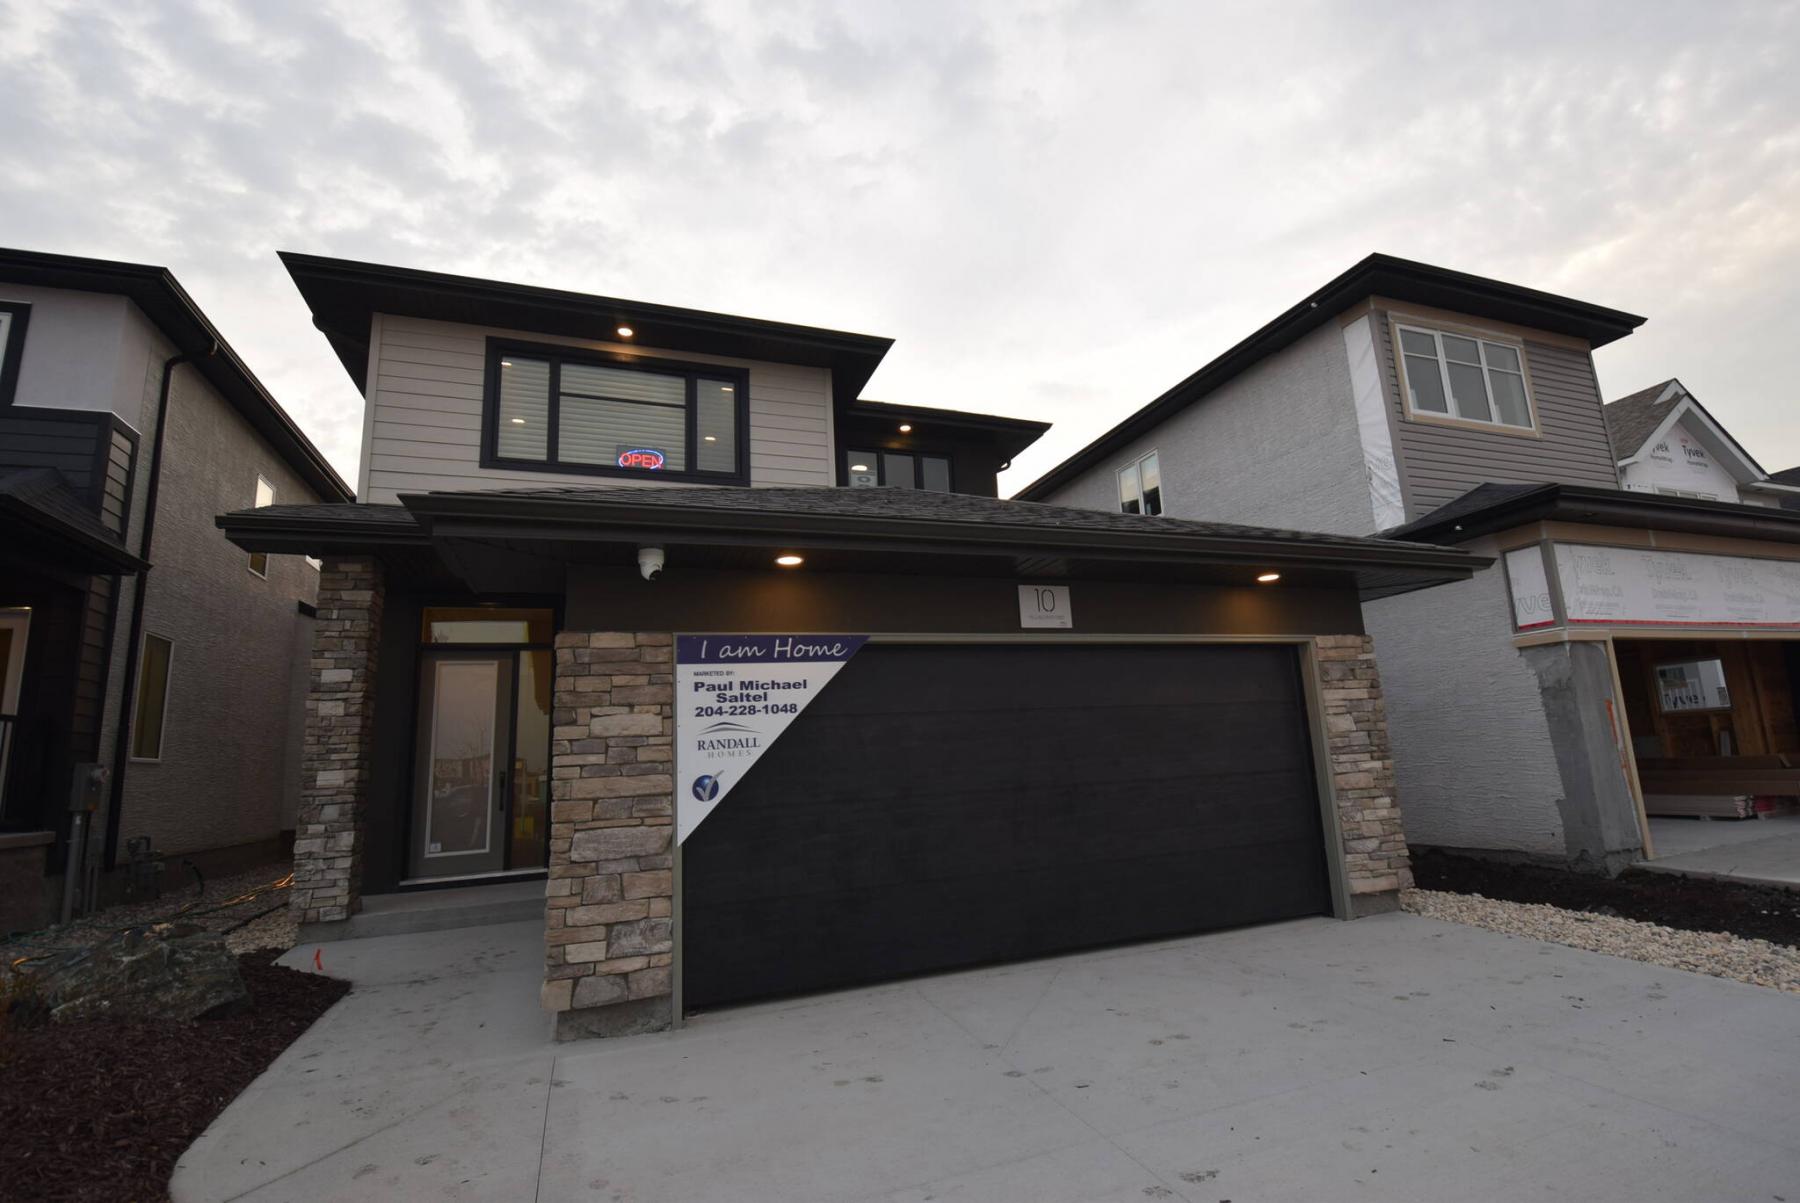  <p>Photos by Todd Lewys / Winnipeg Free Press</p>
                                <p>The Preston, a new two-storey plan, offers family-friendly style and function from top to bottom.</p> 